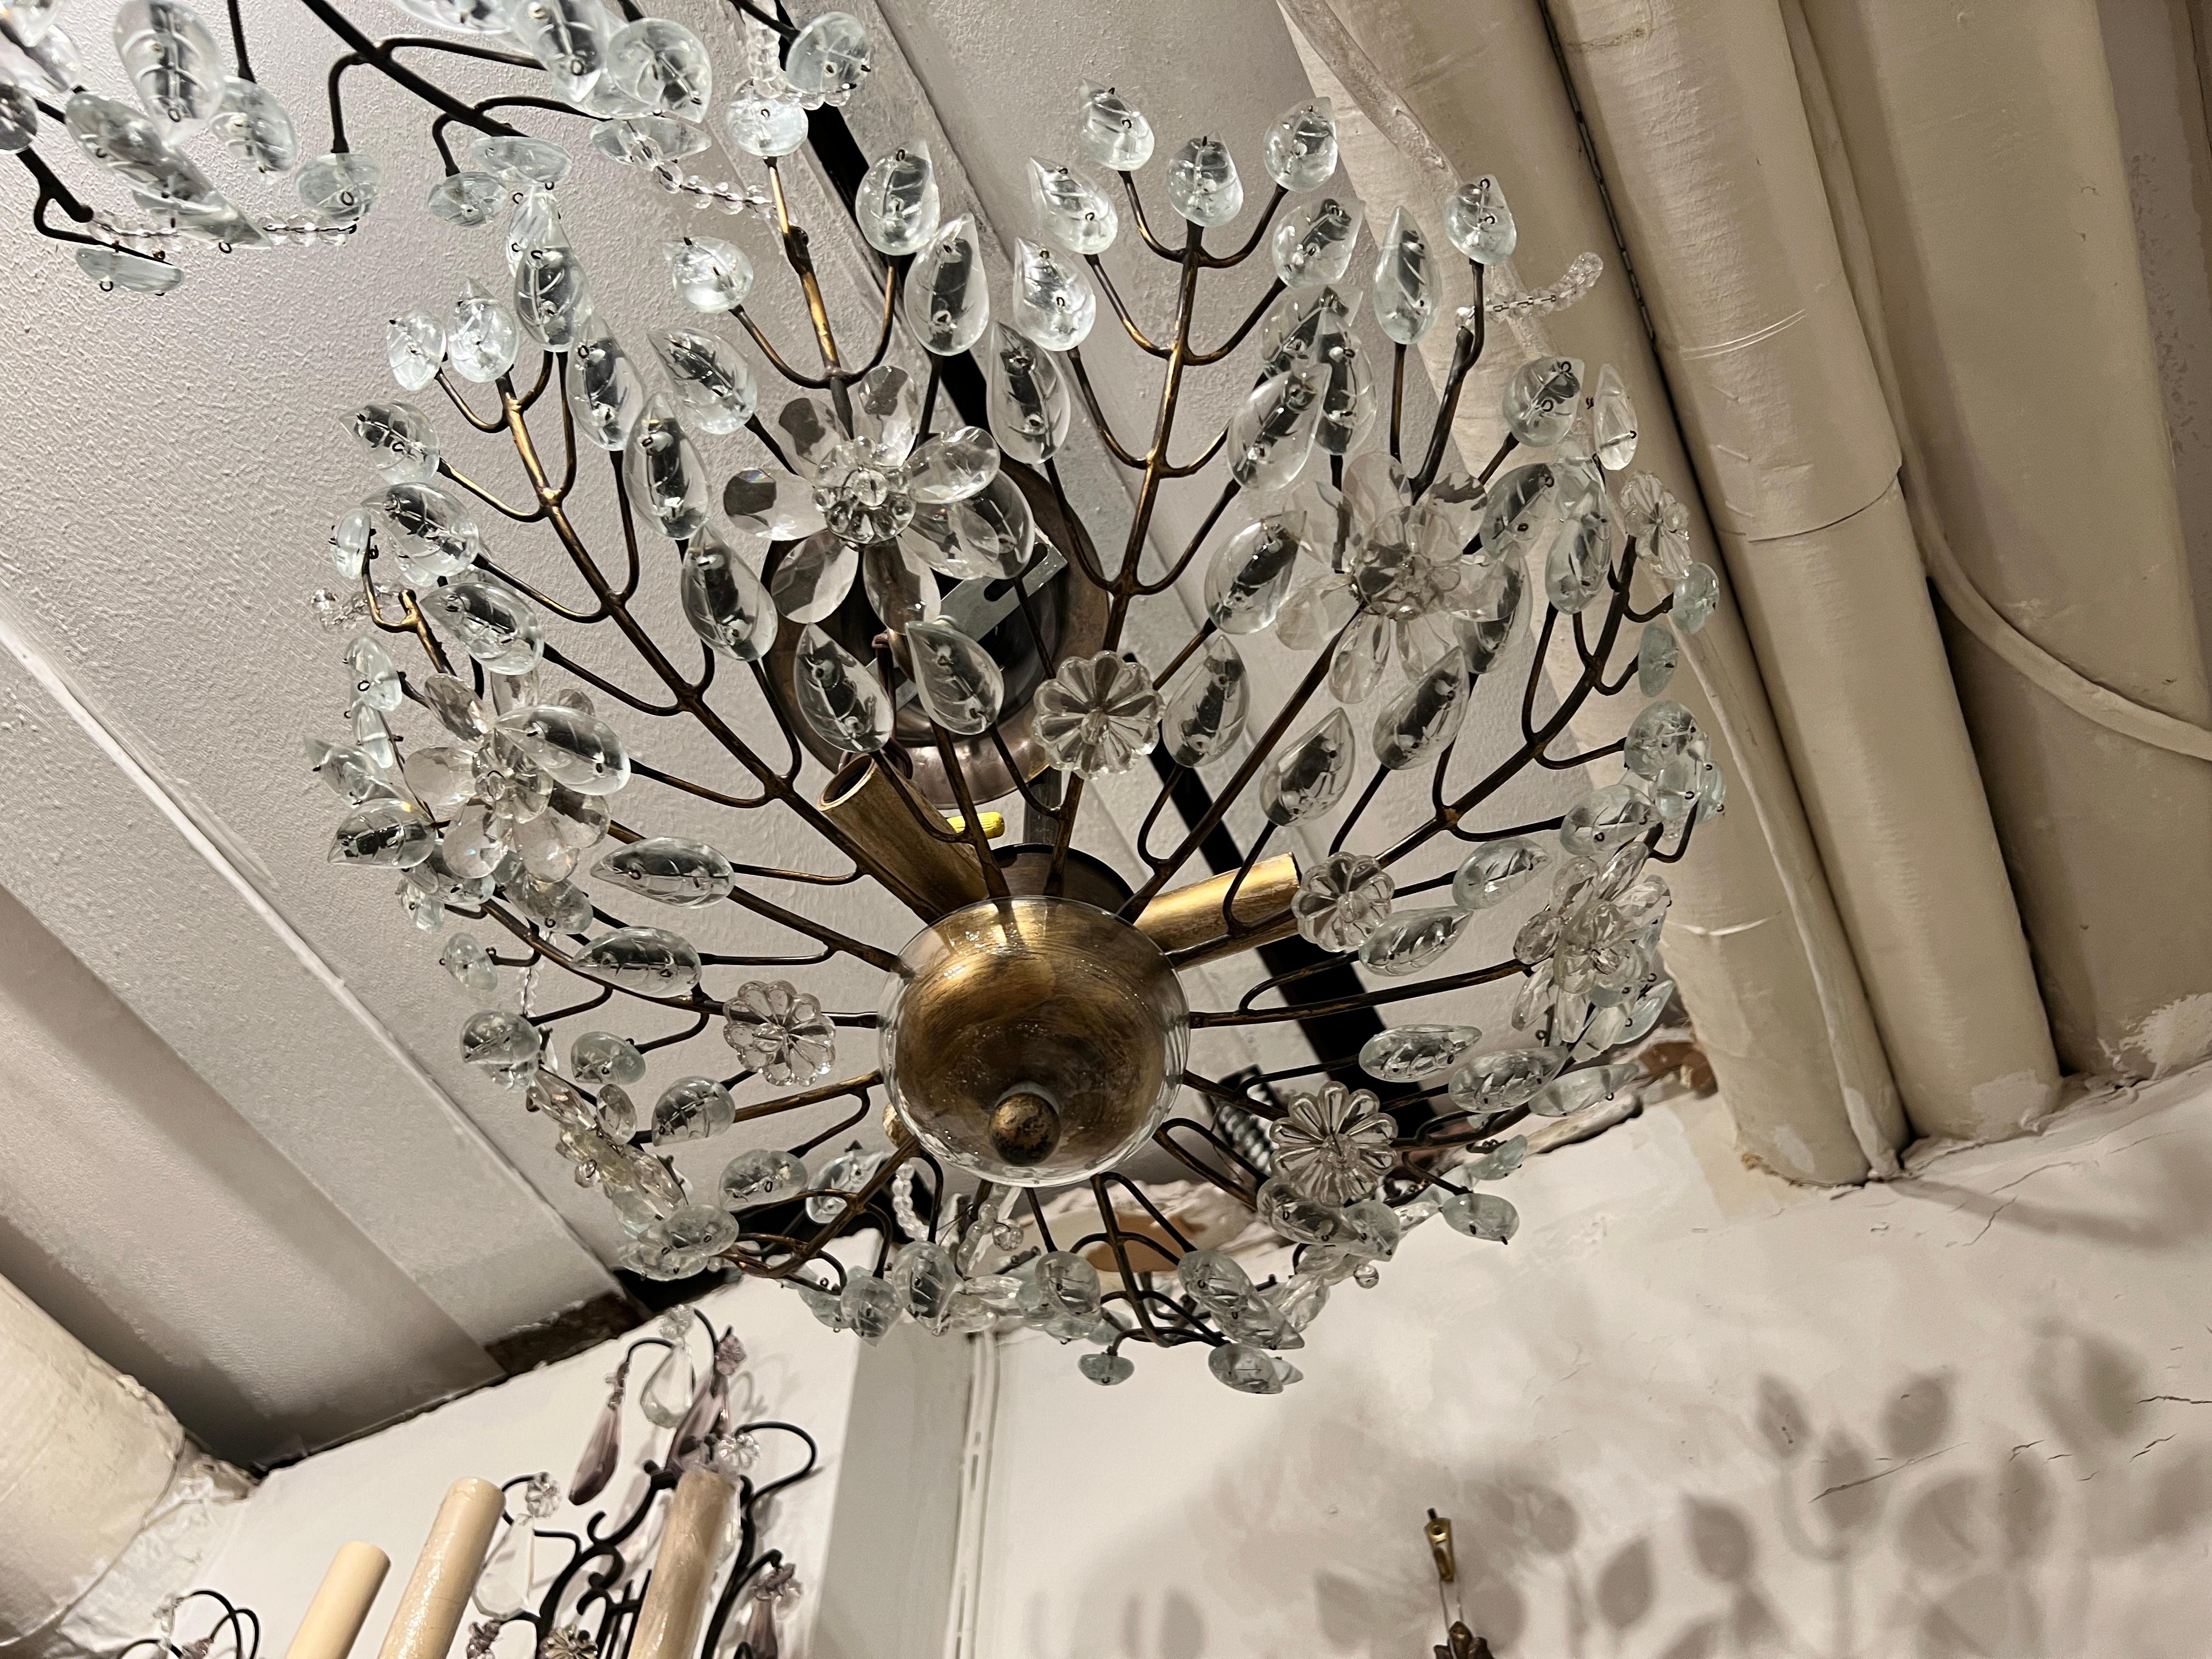 A pair of circa 1940's French patinated bronze light fixtures with molded glass leaves and crystal flowers with three interior lights. Sold individually.

Measurements:
Current drop: 14.5